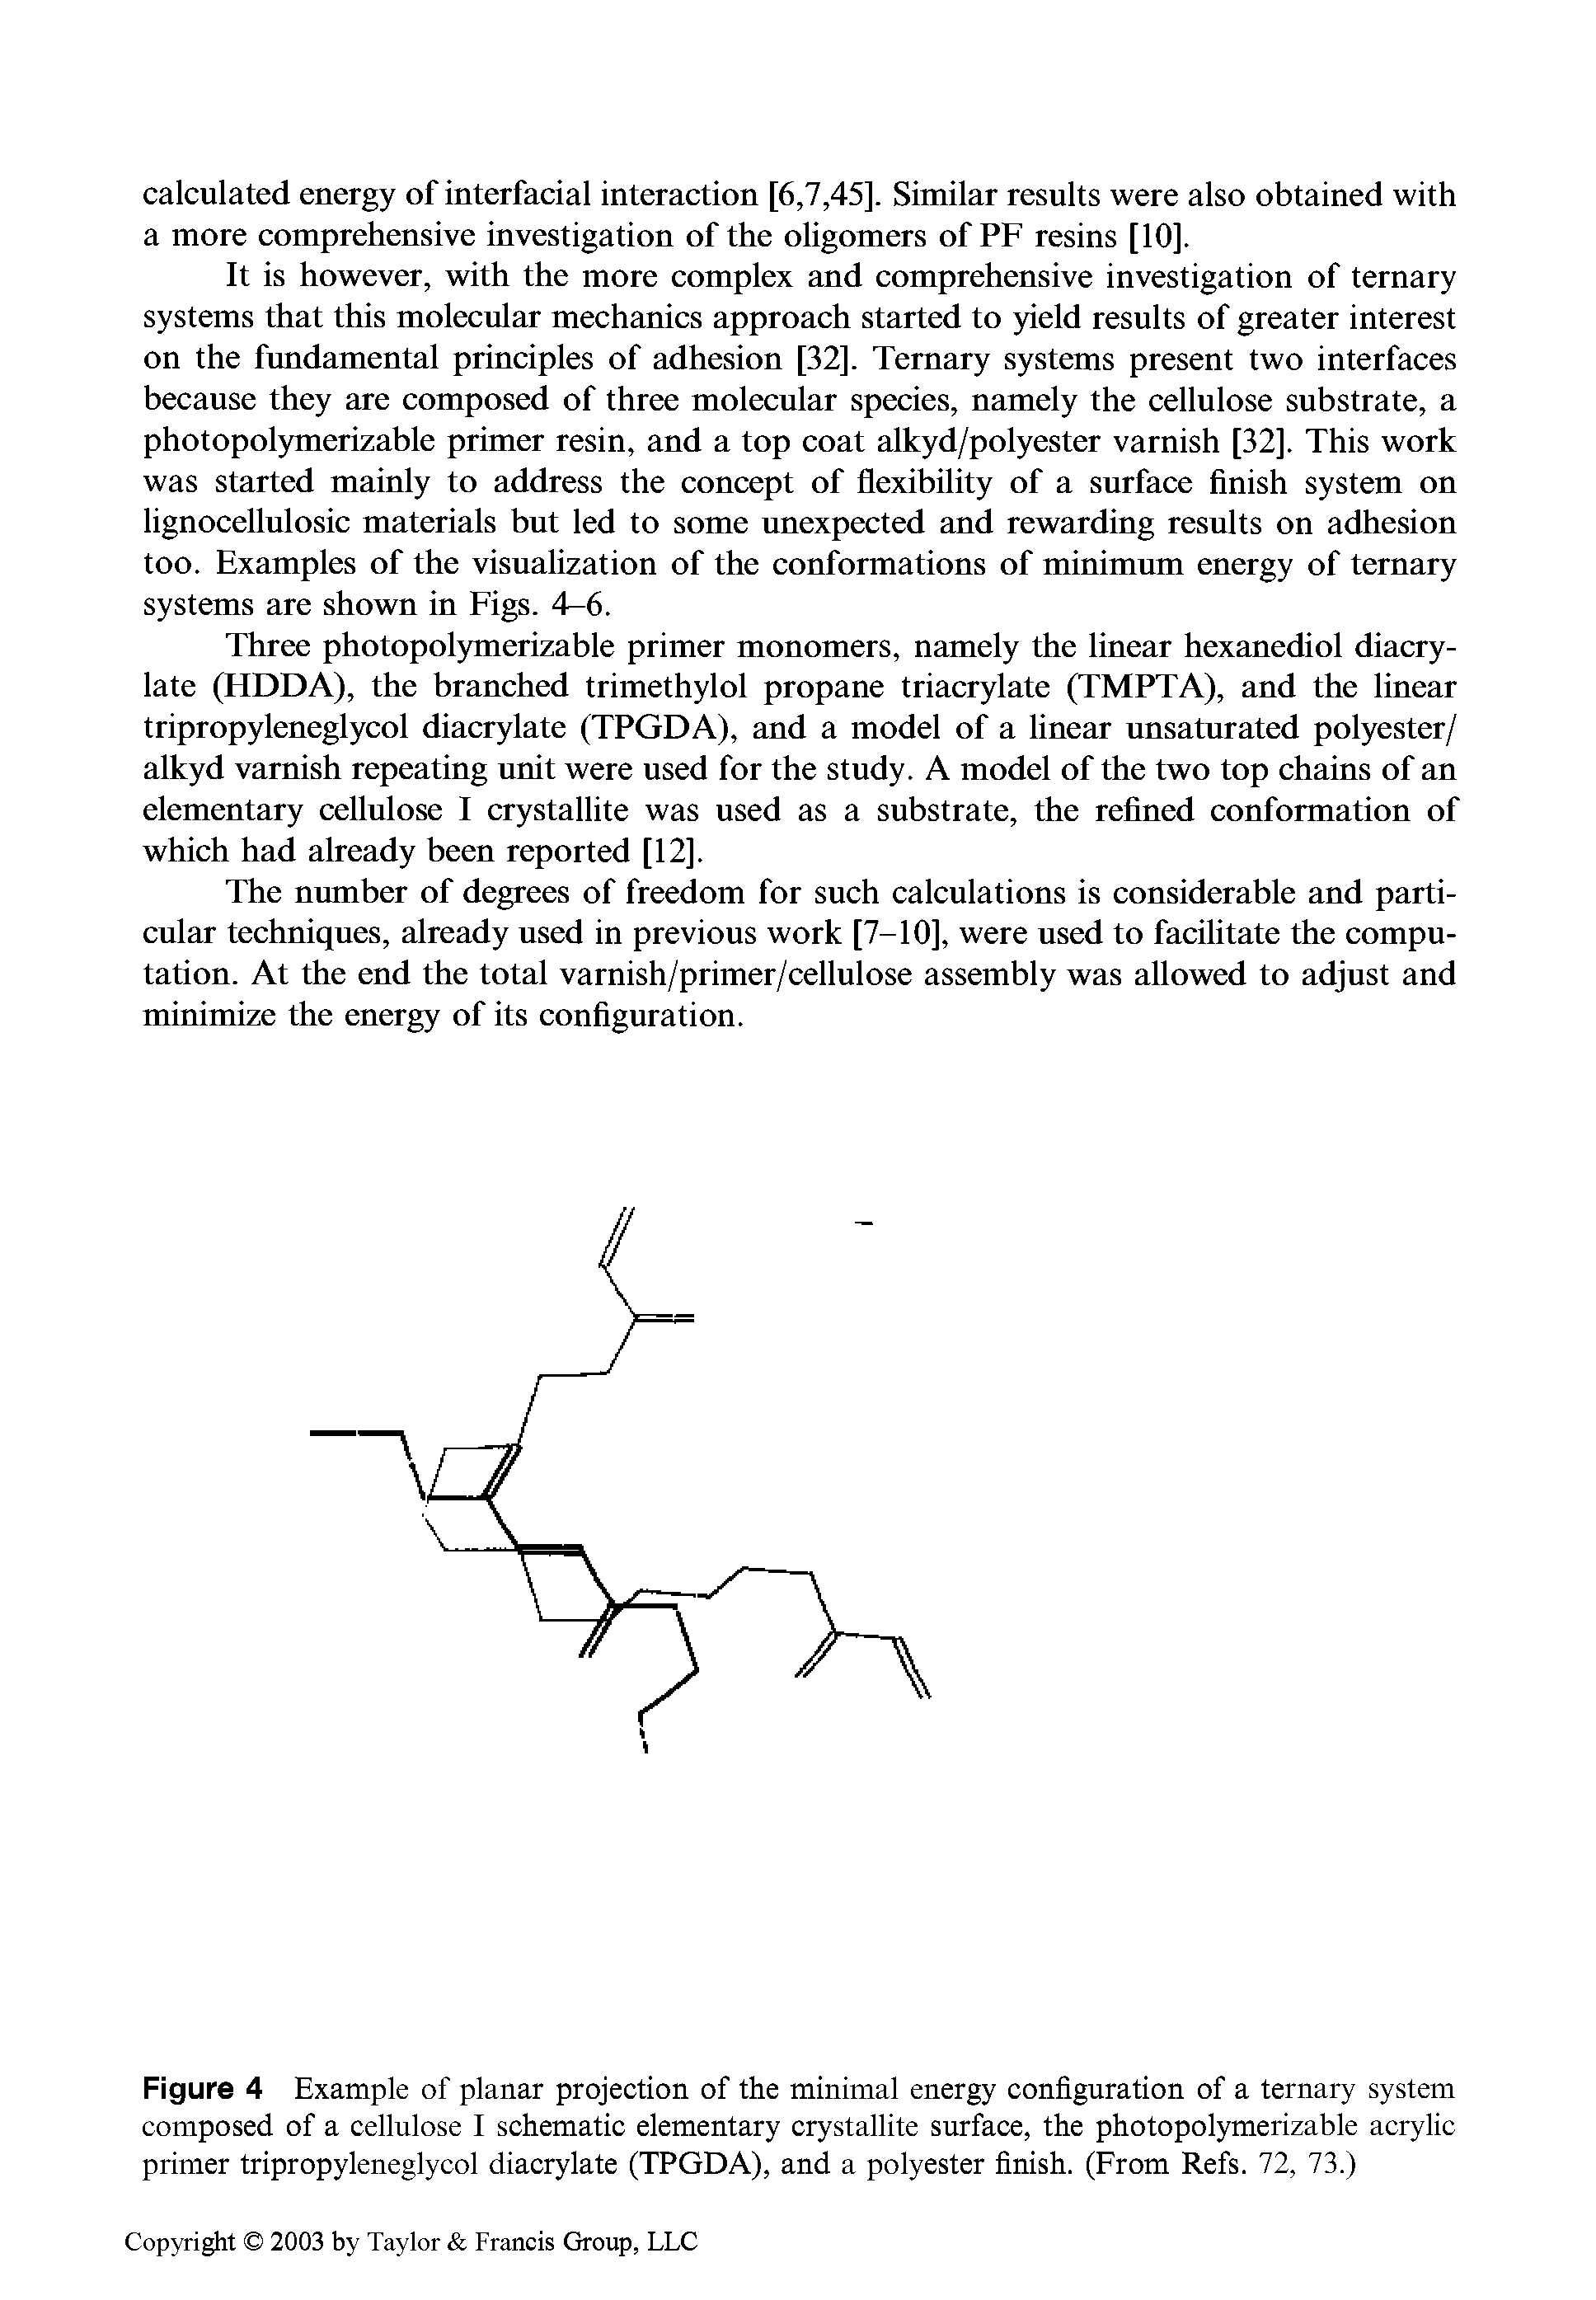 Figure 4 Example of planar projection of the minimal energy configuration of a ternary system composed of a cellulose I schematic elementary crystallite surface, the photopol5mierizable acrylic primer tripropyleneglycol diacrylate (TPGDA), and a polyester finish. (From Refs. 72, 73.)...